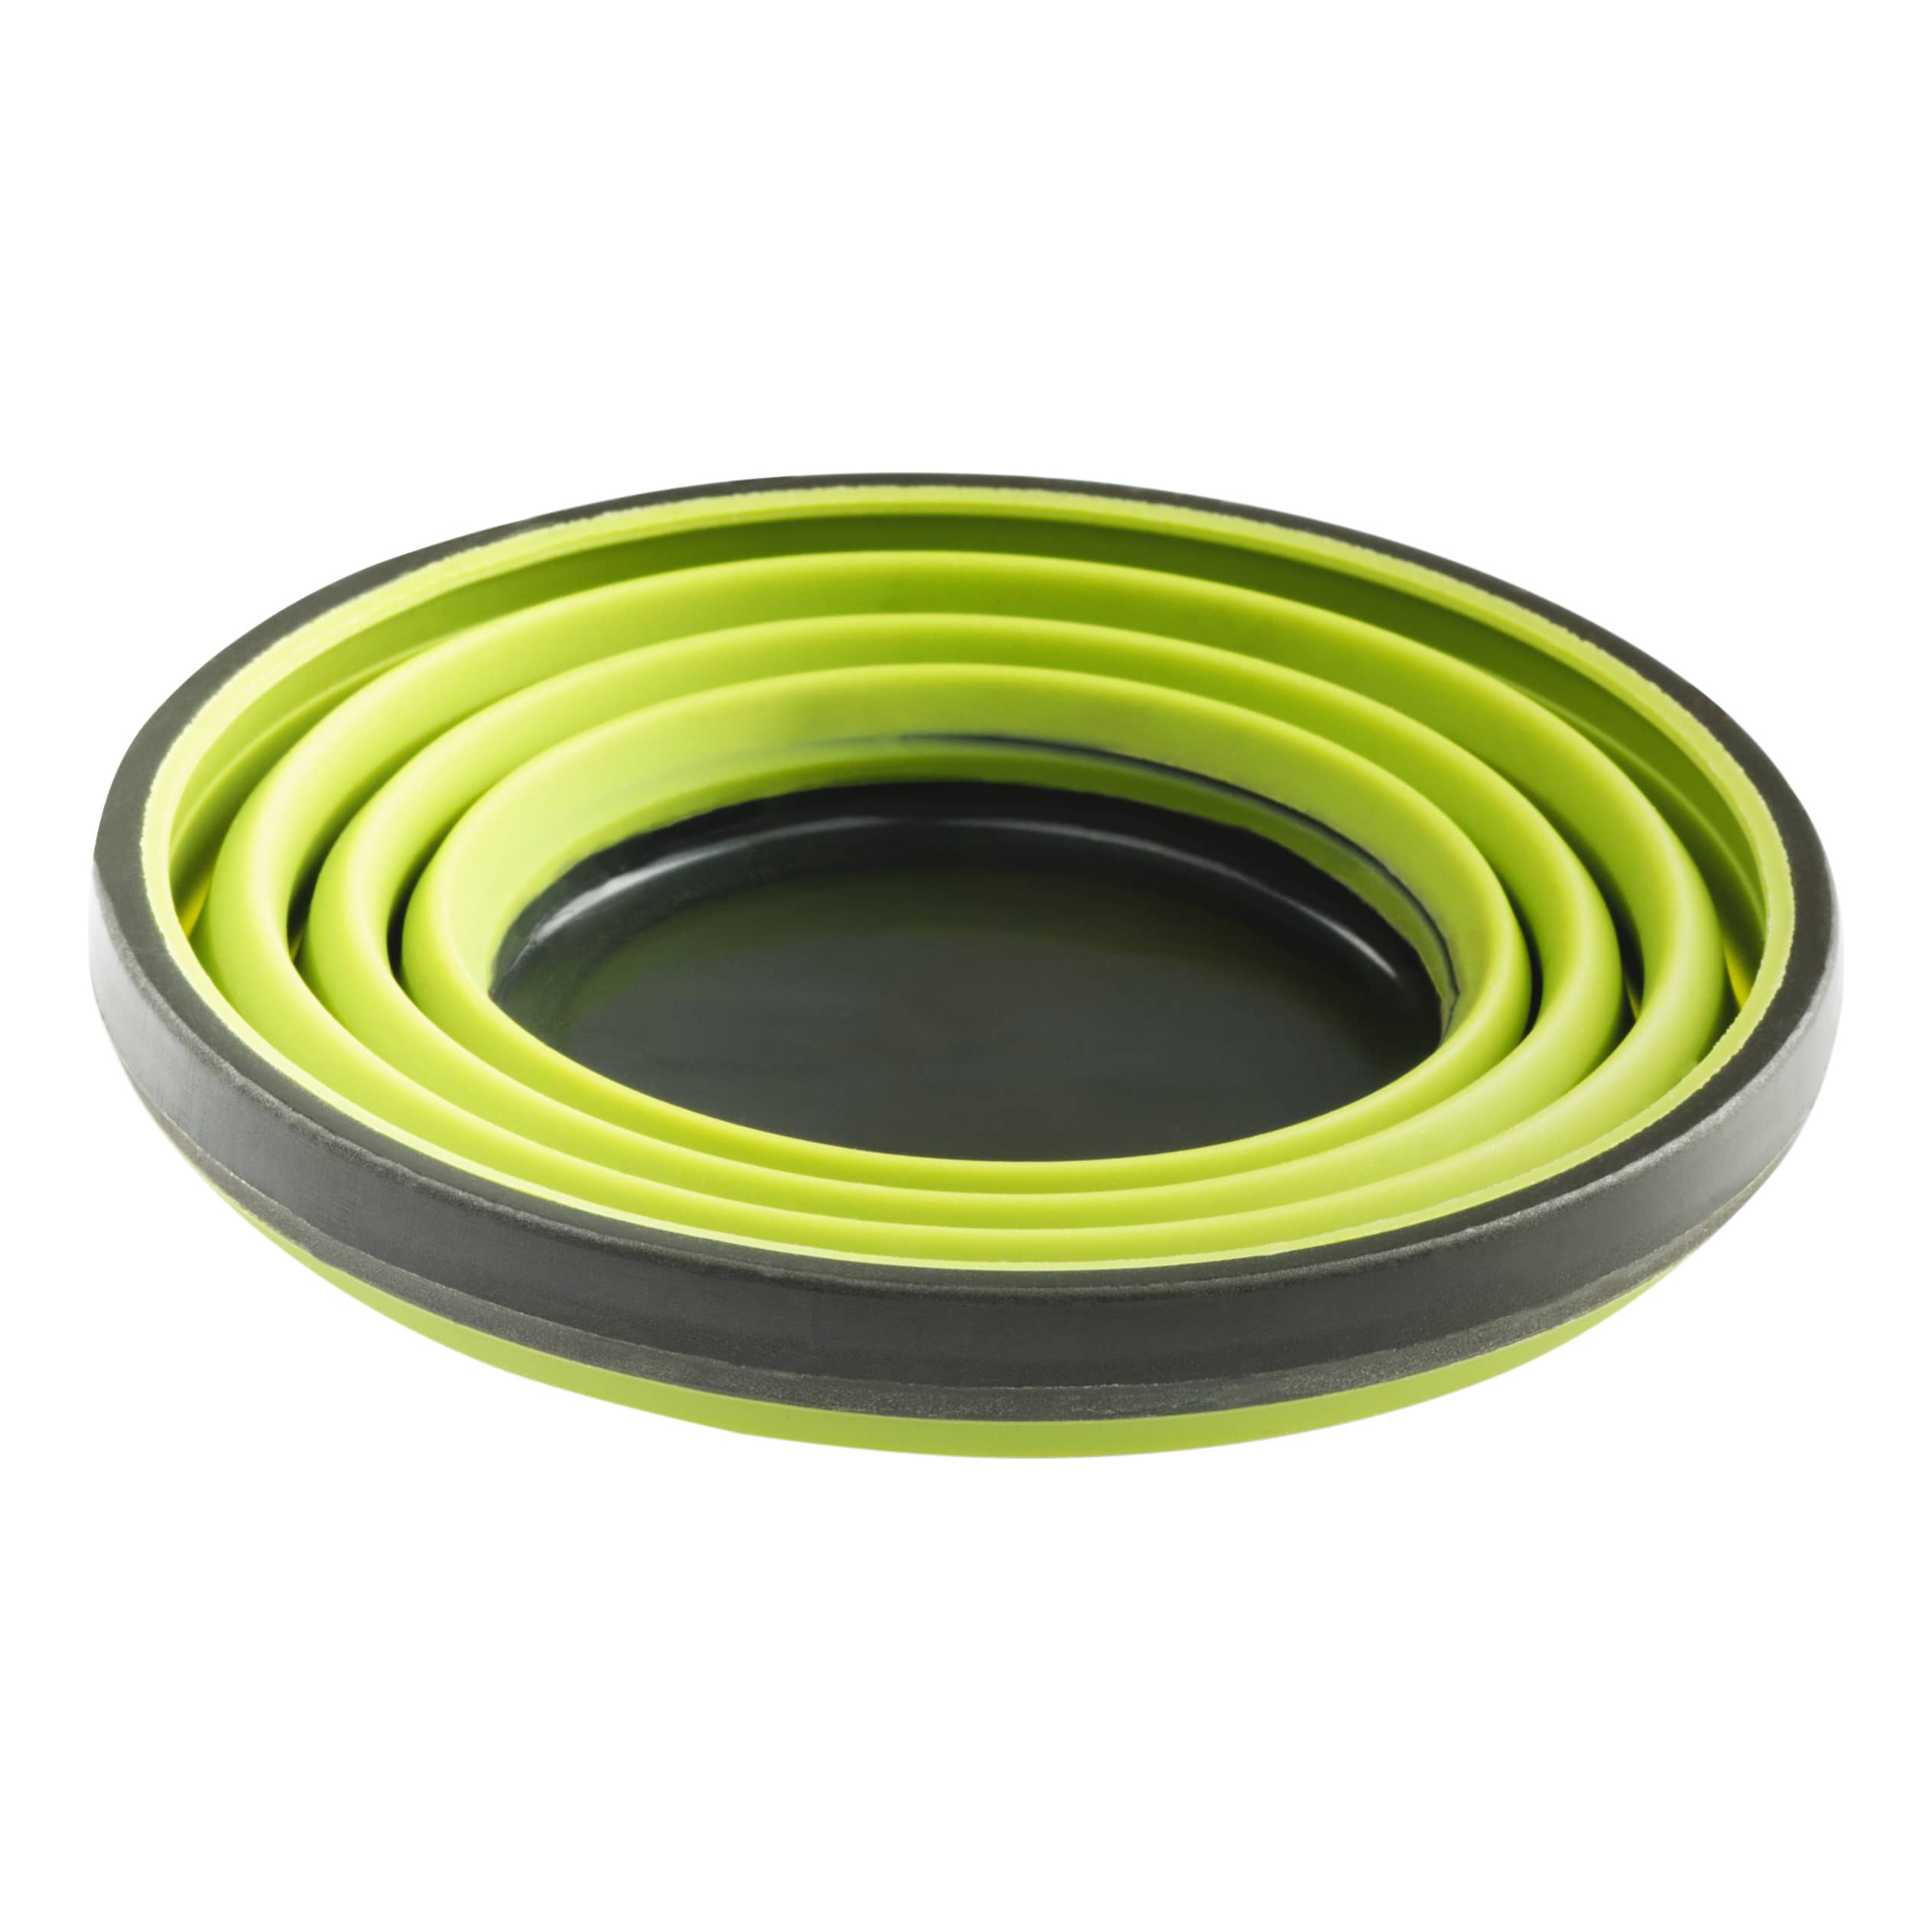 GSI Outdoors Escape Collapsible Cup - Green - Collapsed View